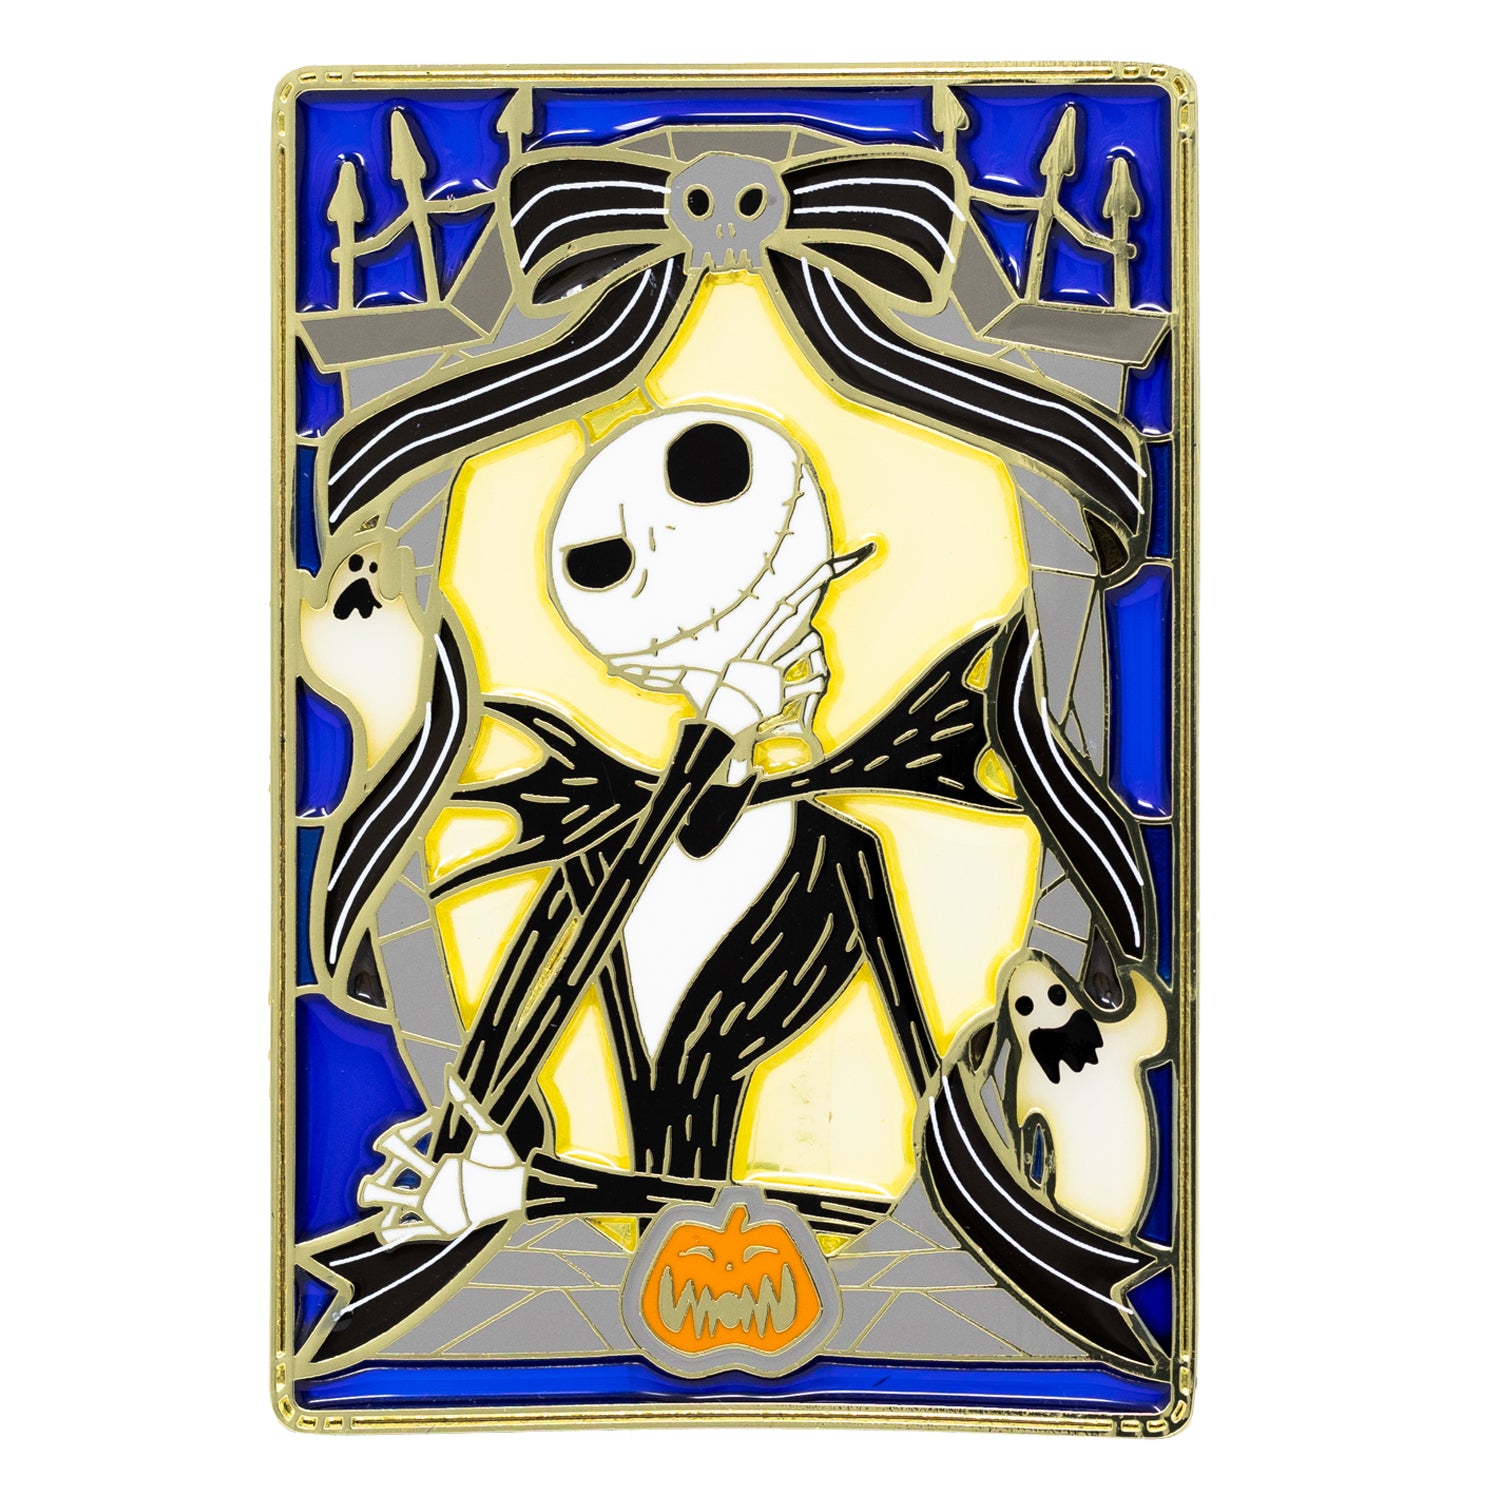 Nightmare Before Christmas Jack Skellington 3" Collectible Pin Limited Edition 300